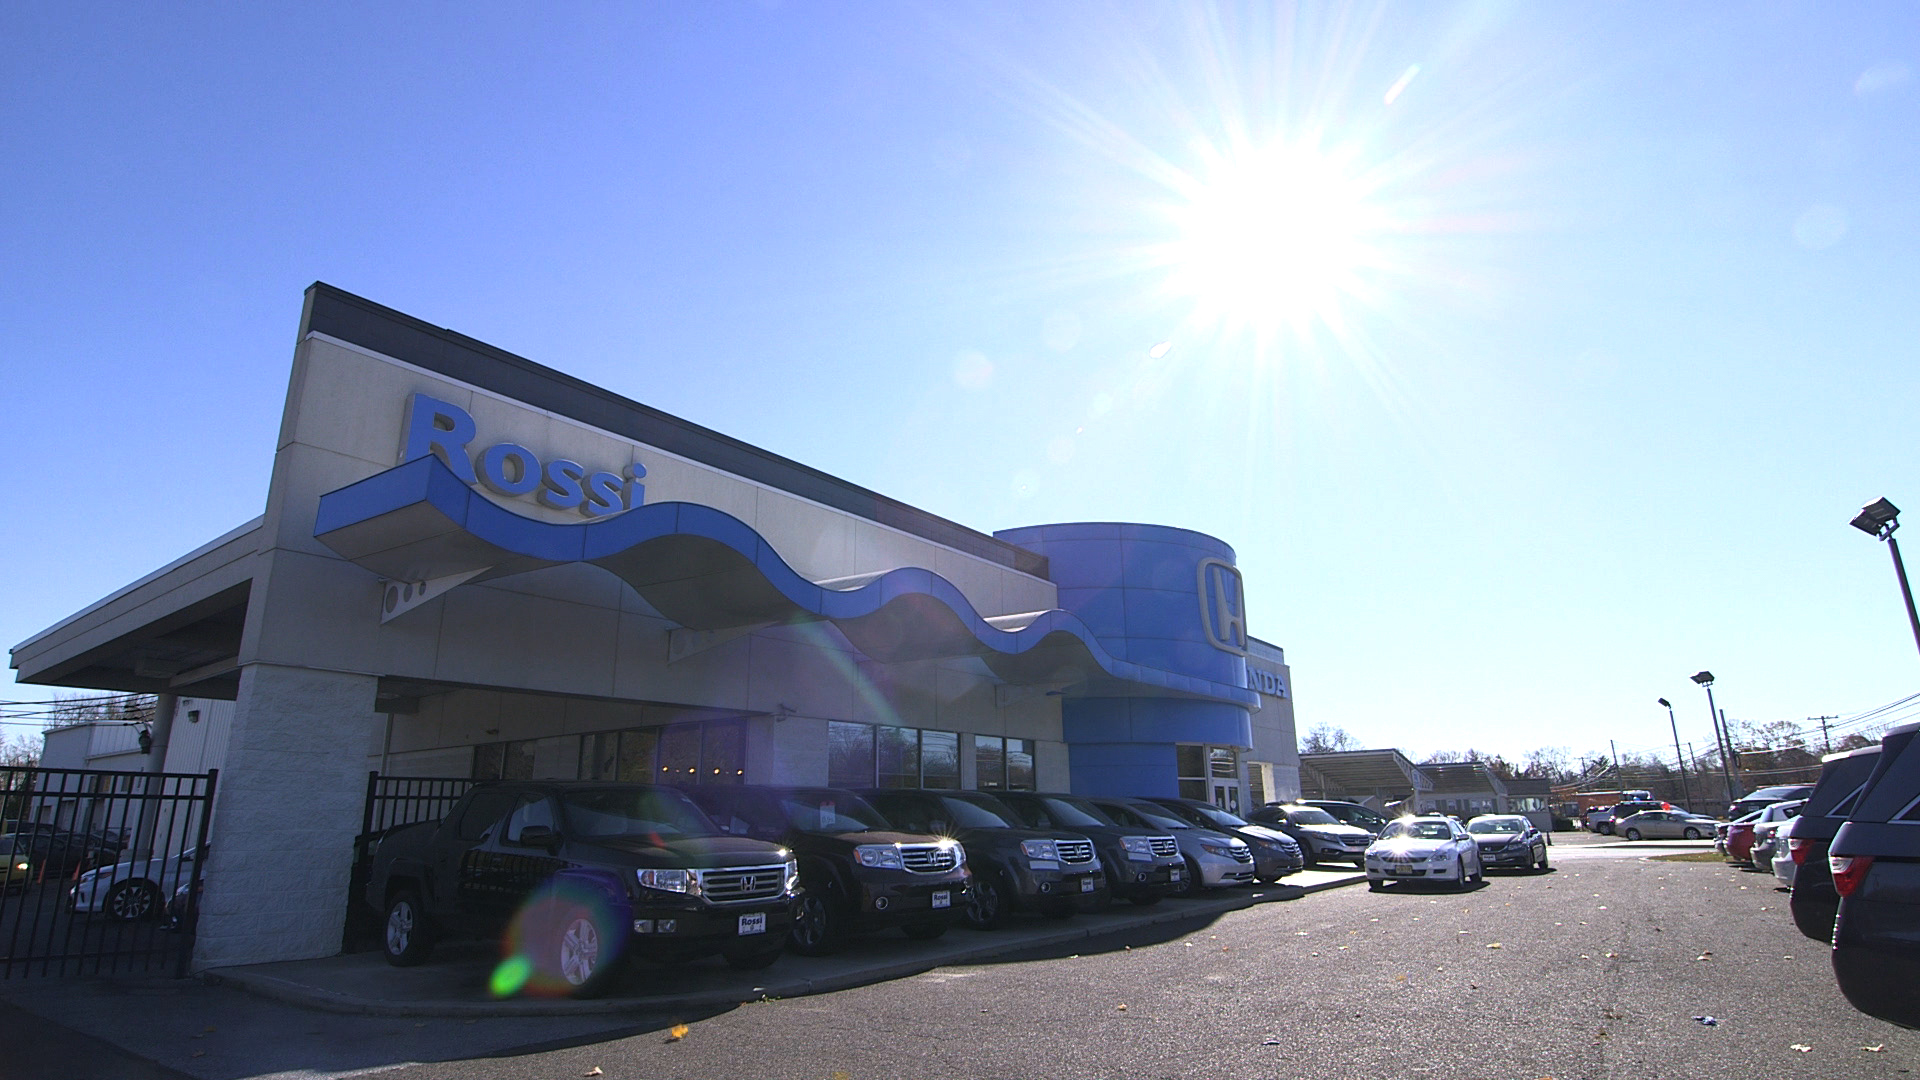 Honda Dealer In NJ Is First In U.S. To Use No Net Electricity